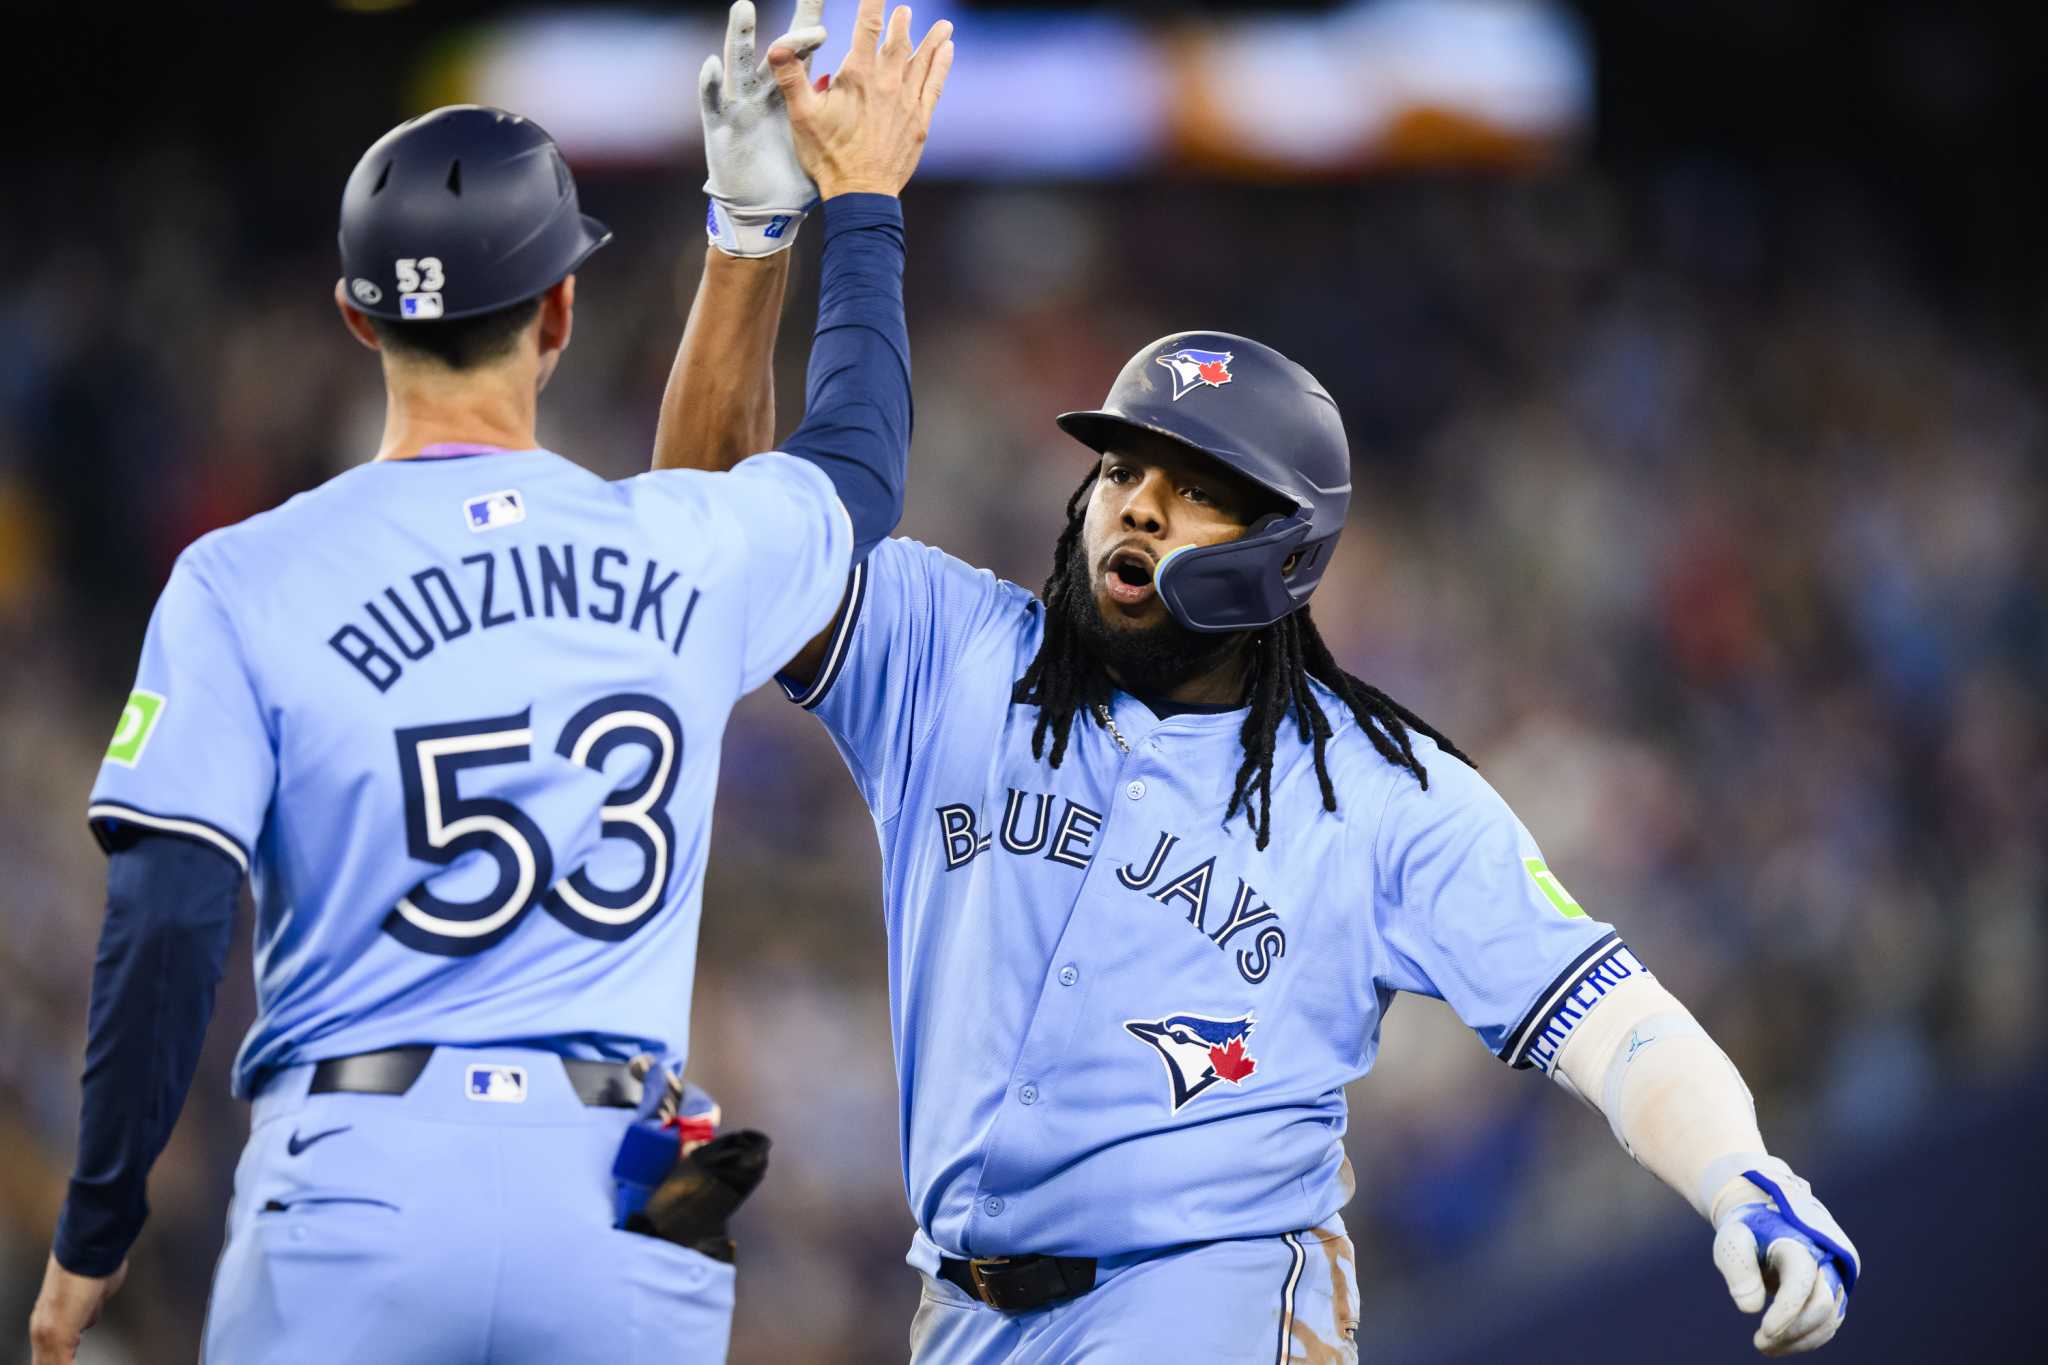 Clement gets winning hit as Blue Jays rally to beat red-hot Twins 10-8